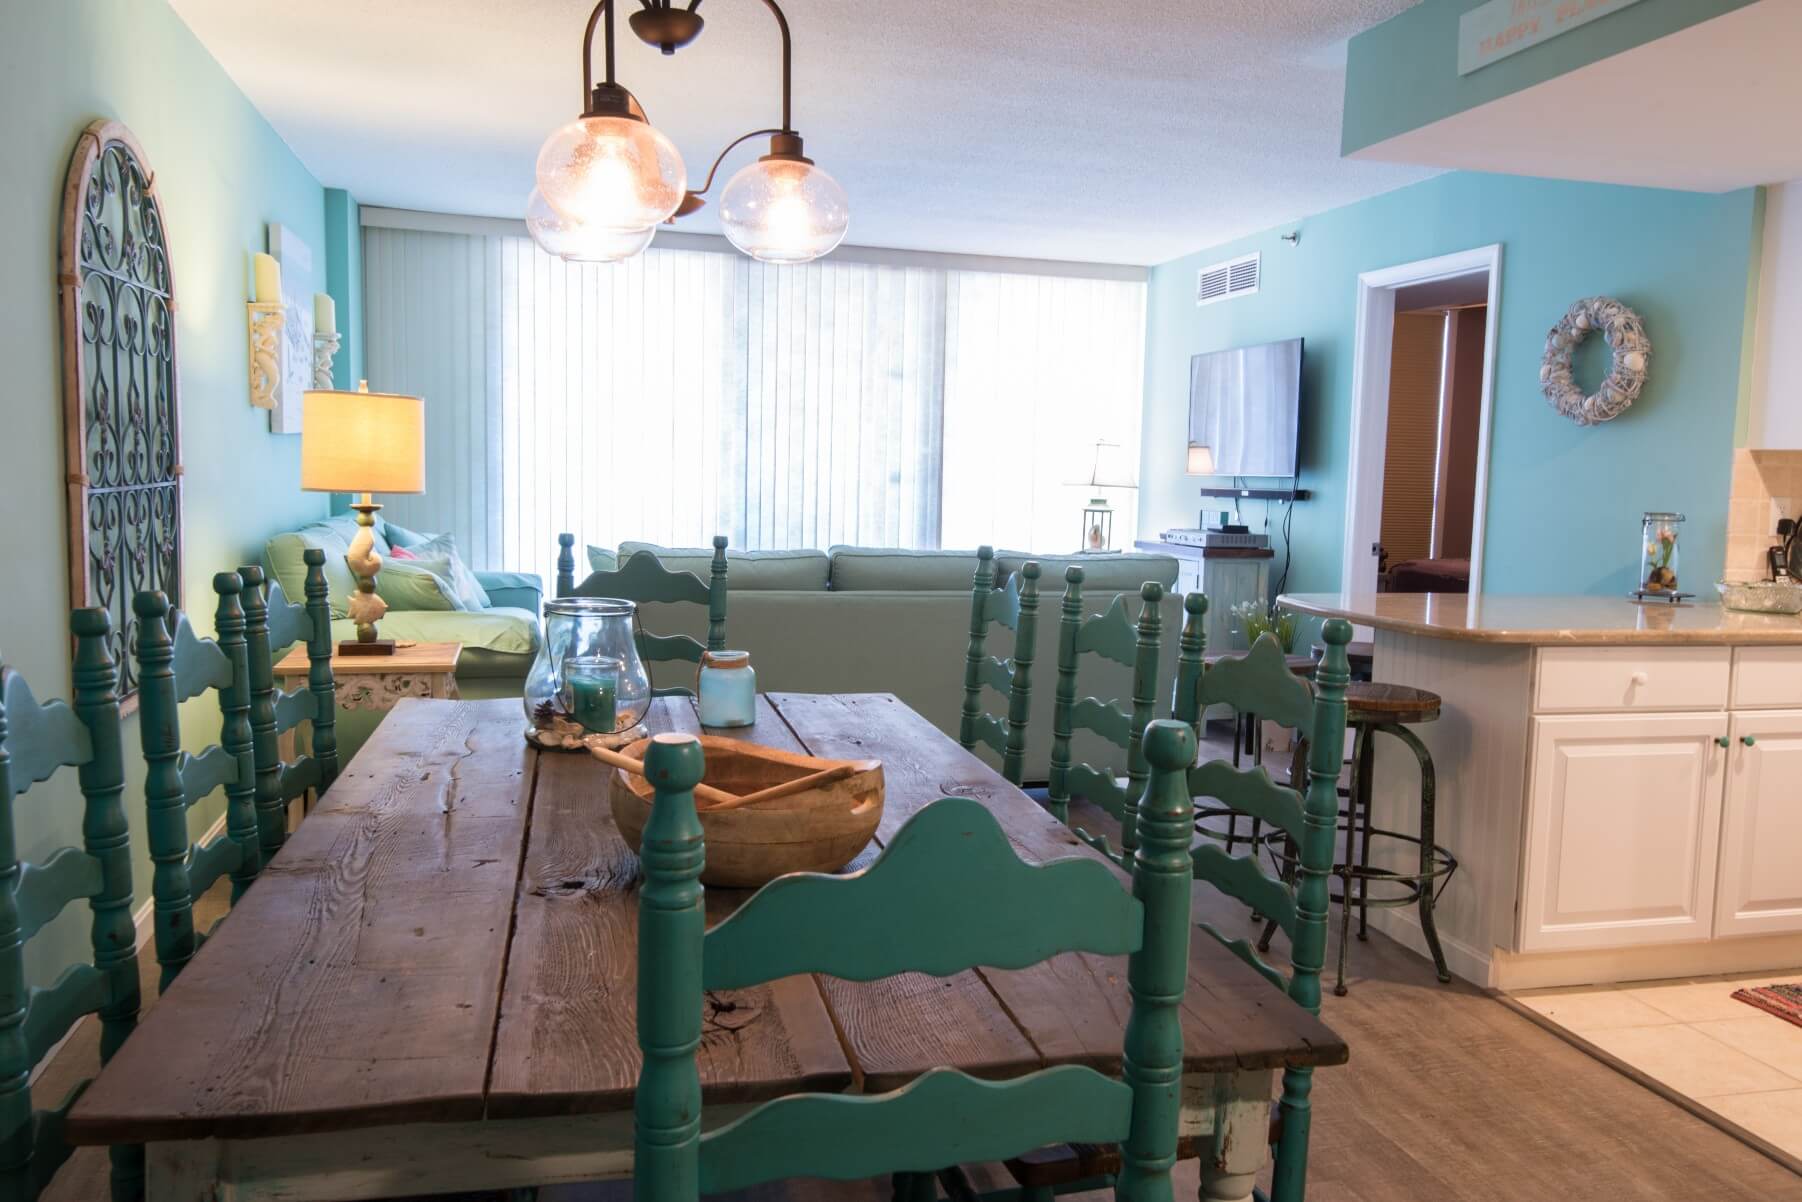 Sea Colony Condo Renovation Bethany Beach, DE with Turquoise Wall Paint, Vintage Wooden Dining Table and Vintage Chandelier